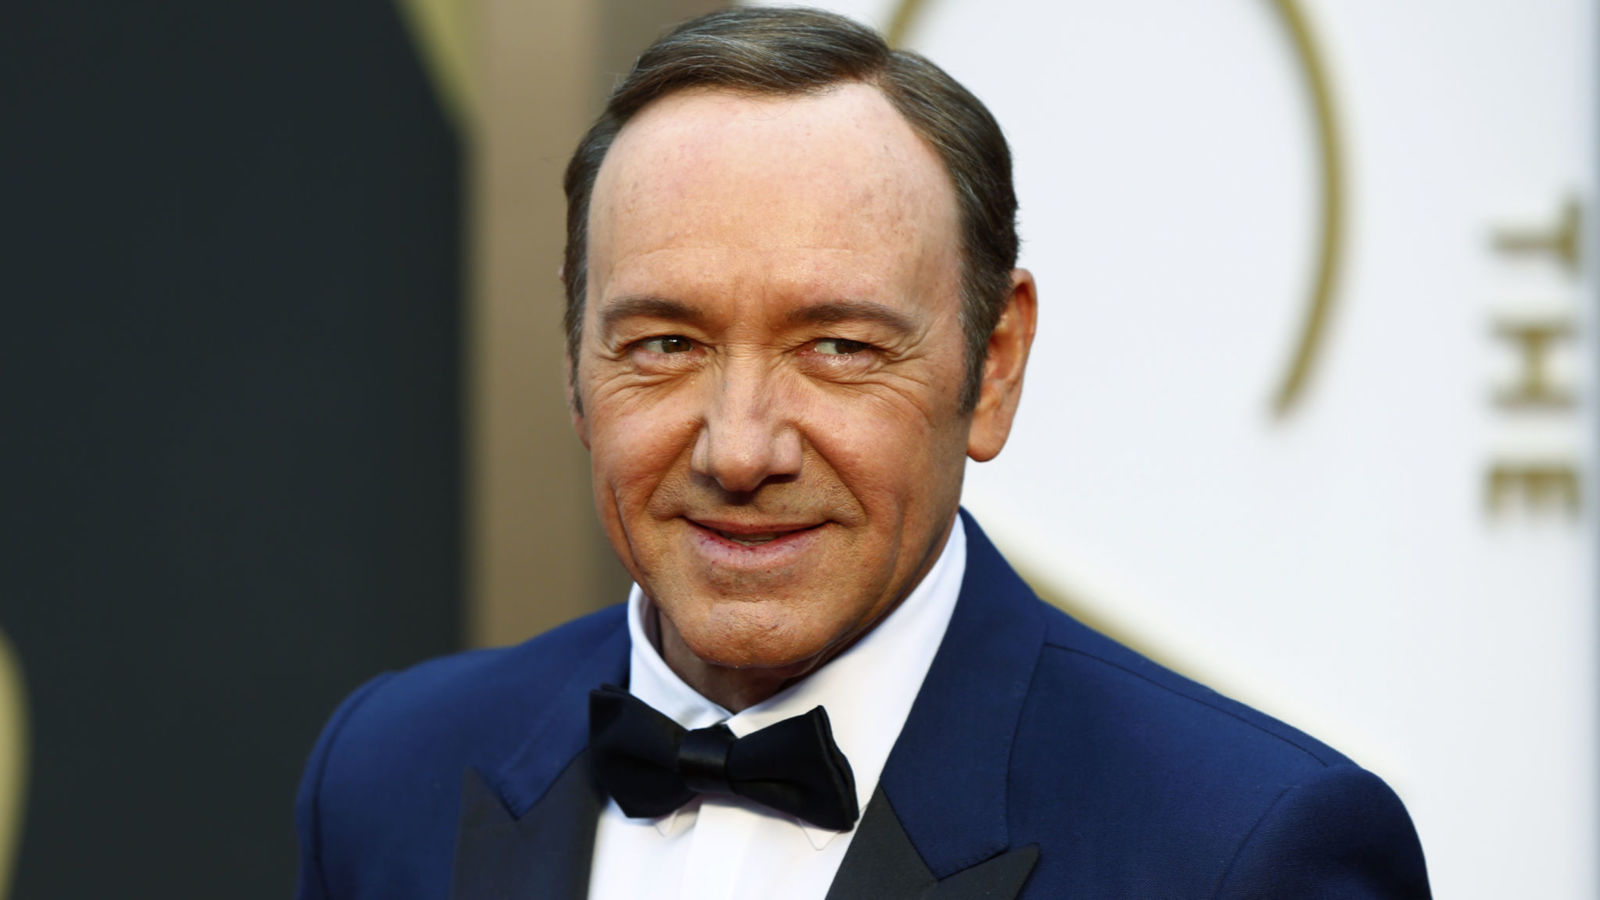 Actor Kevin Spacey arrives at the 86th Academy Awards in Hollywood